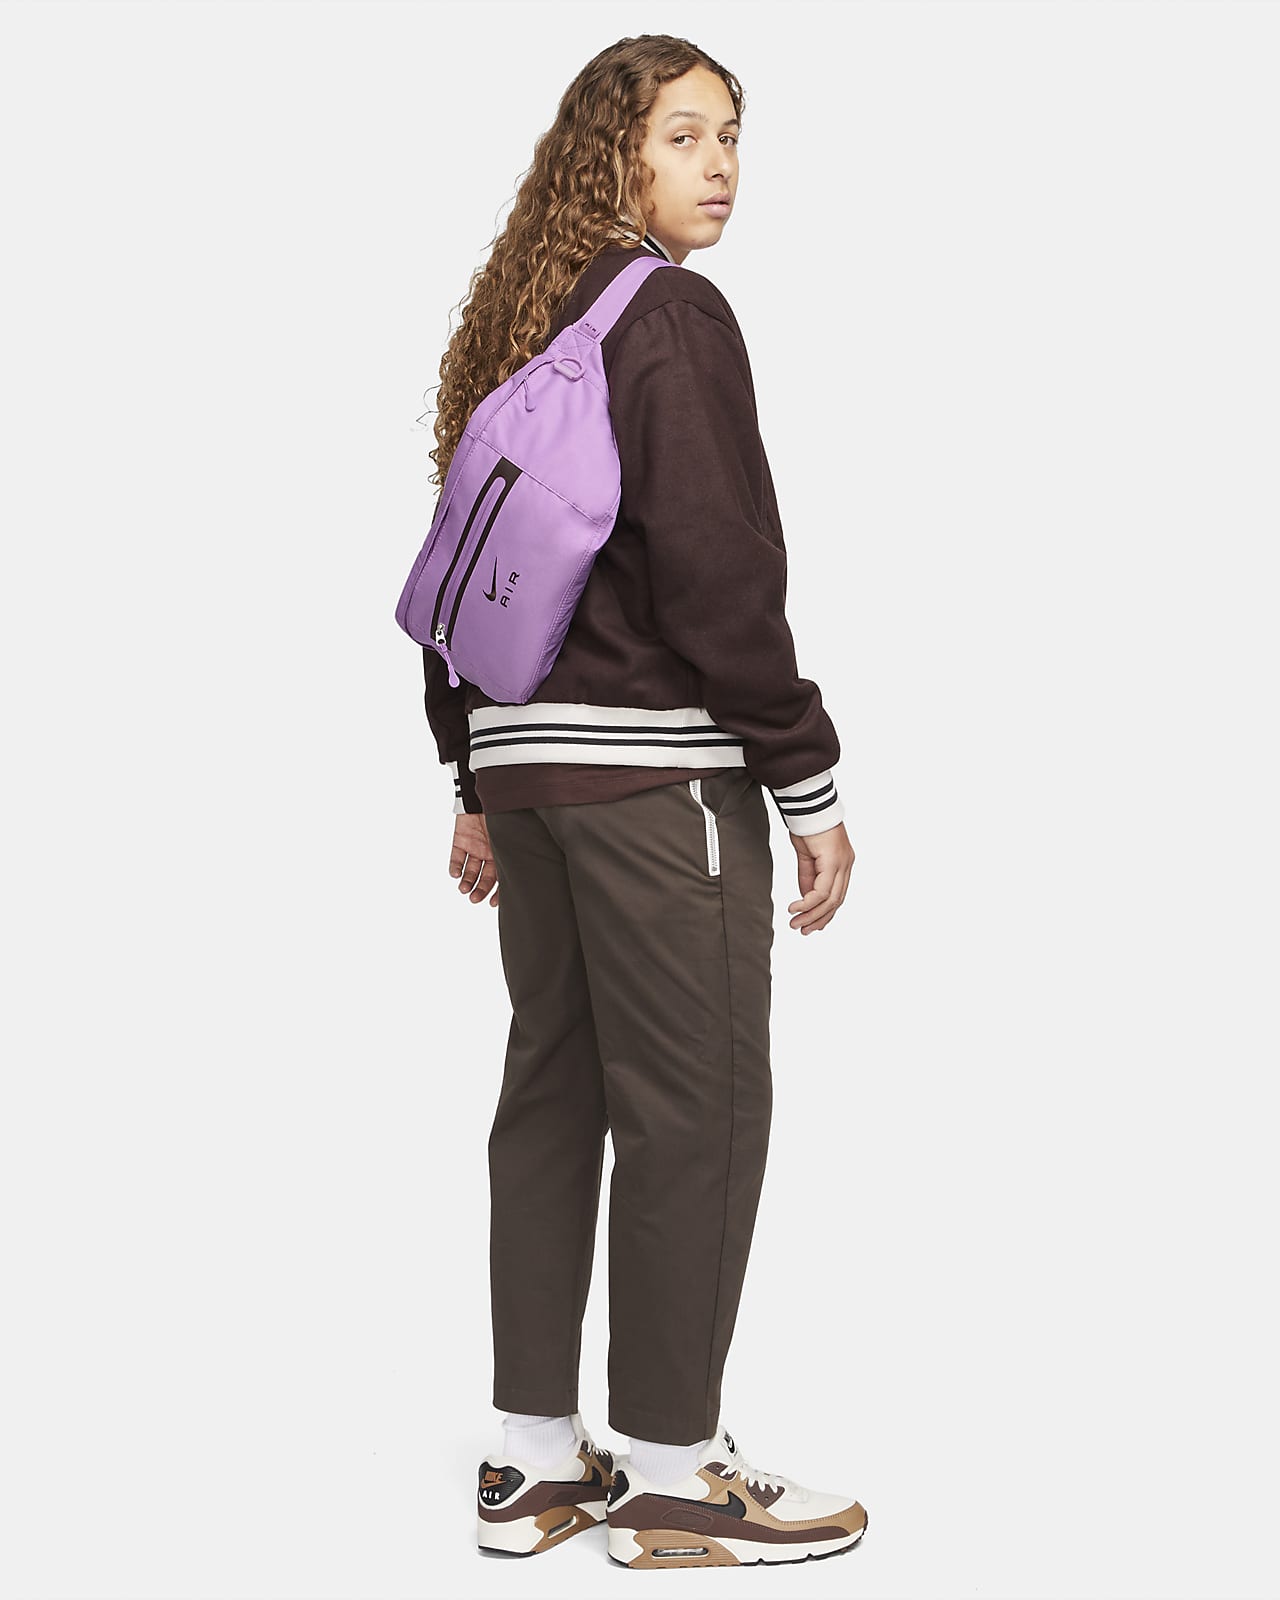 Nike Fanny Packs: Find Nike Accessories for Your Active Lifestyle